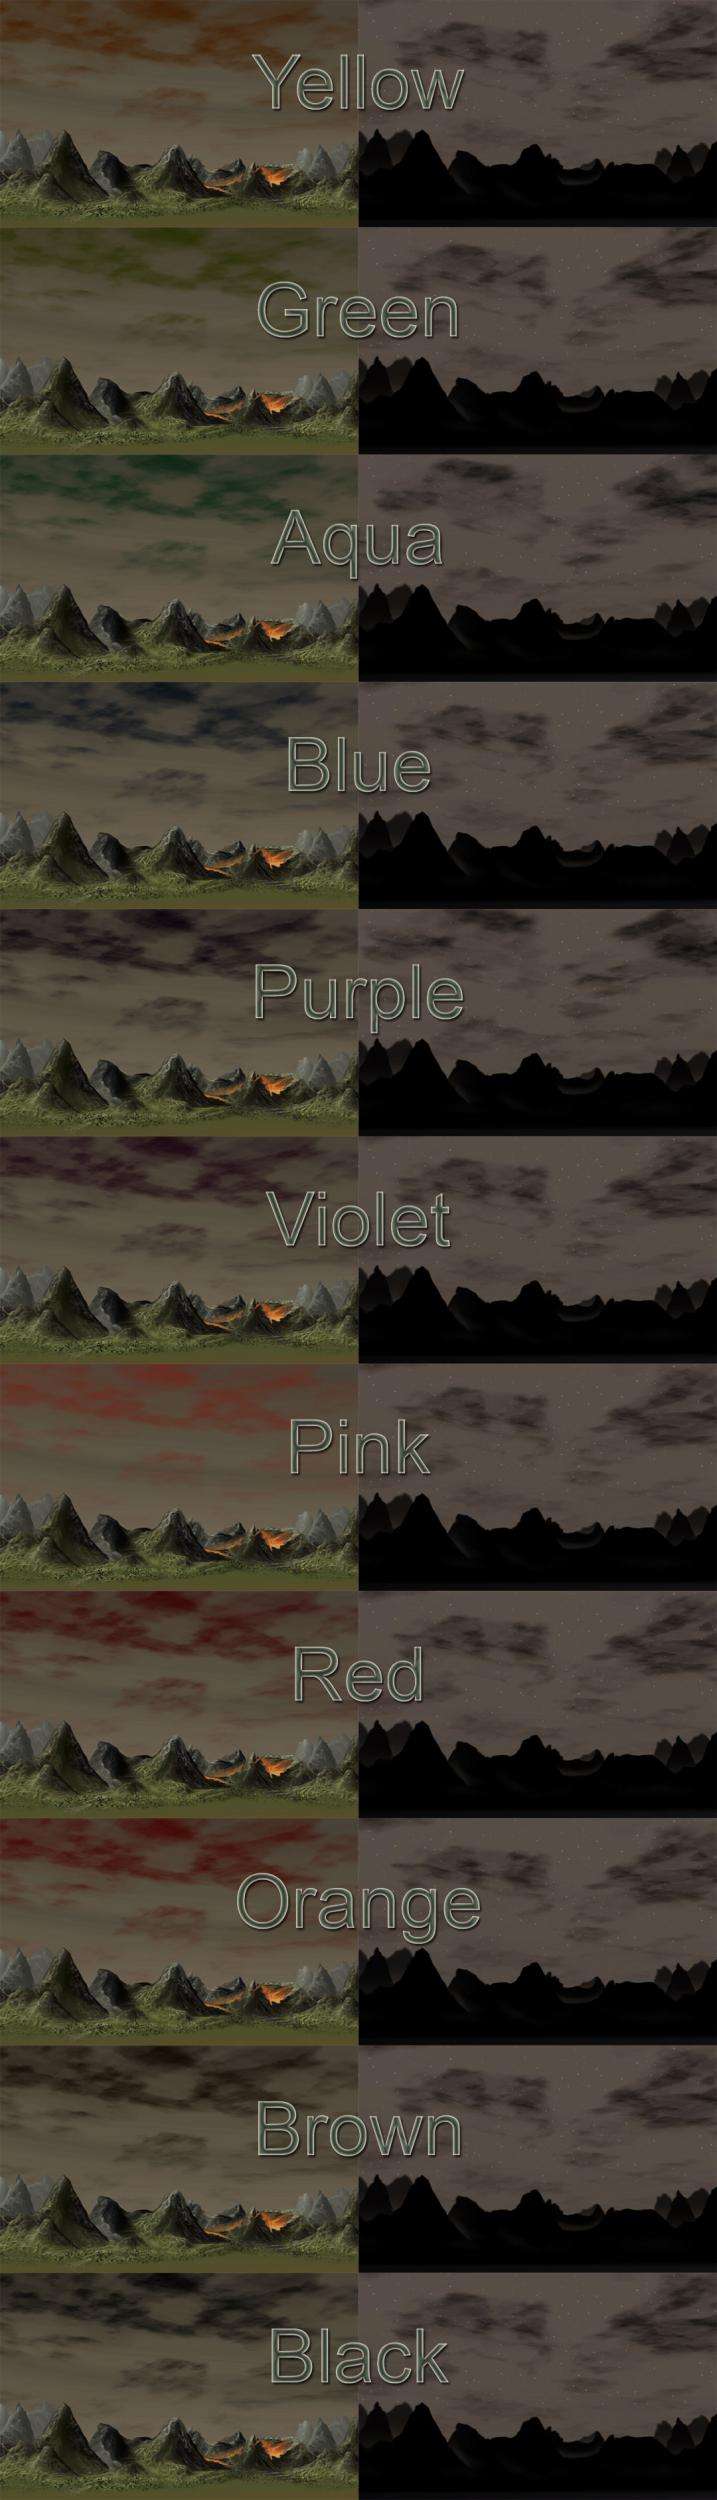 My Downloads - TexMod Packs: Gothic, Prehistoric, & Spooky Skies - Demo Screenshot Collage Displaying All Eleven Sky Colors, With the Day Skies on the Left Coupled With the Night Skies on the Right, Image 01